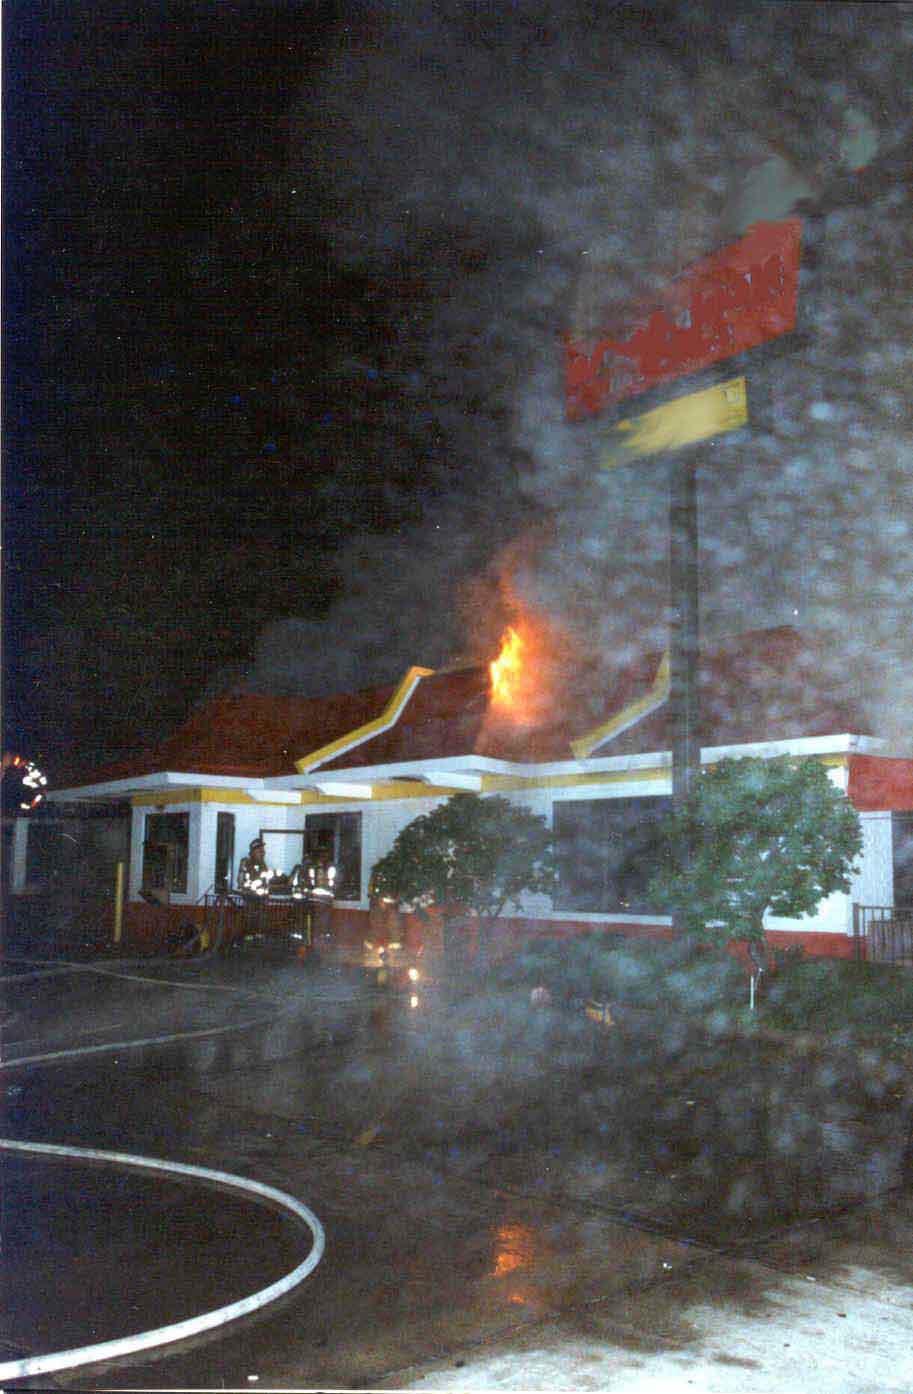 Photo 5: Exterior view of the restaurant during the early stages of the fire.